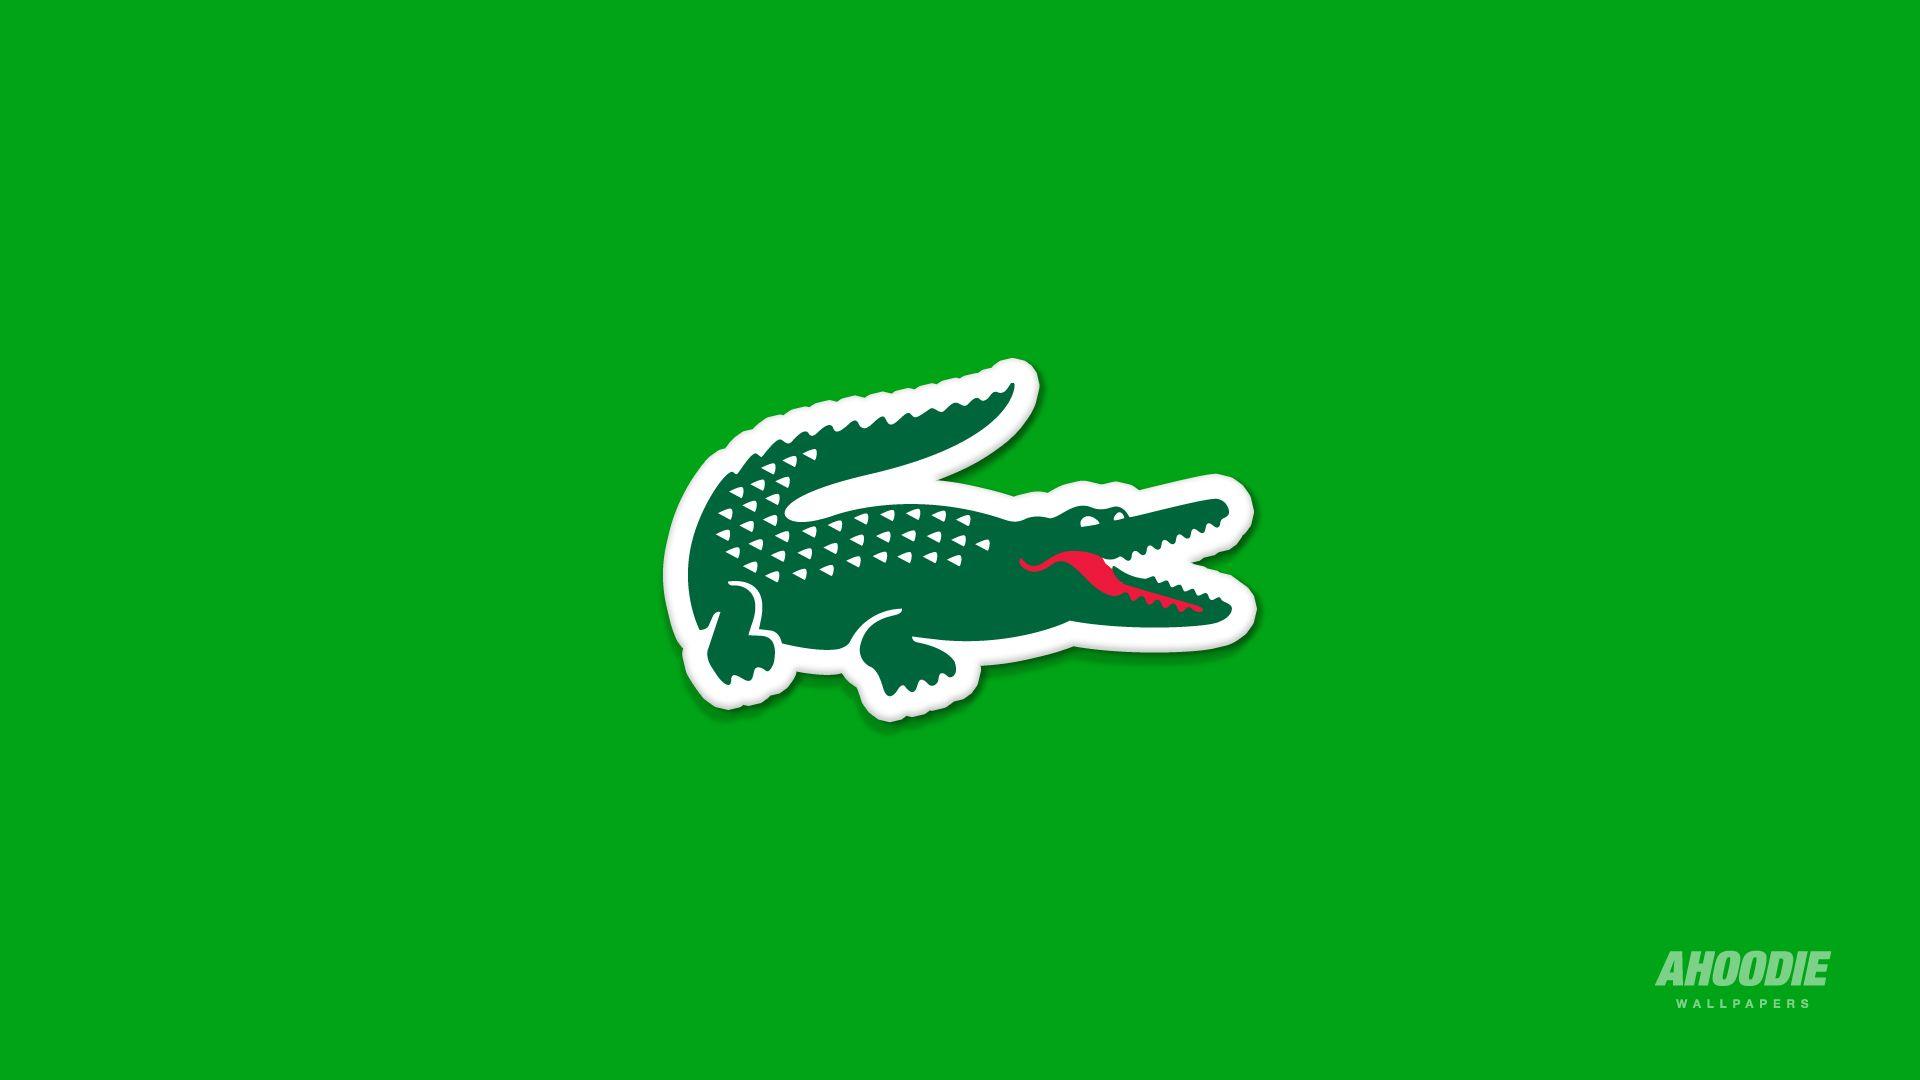 lacoste. Lacoste, Wallpaper and Logos